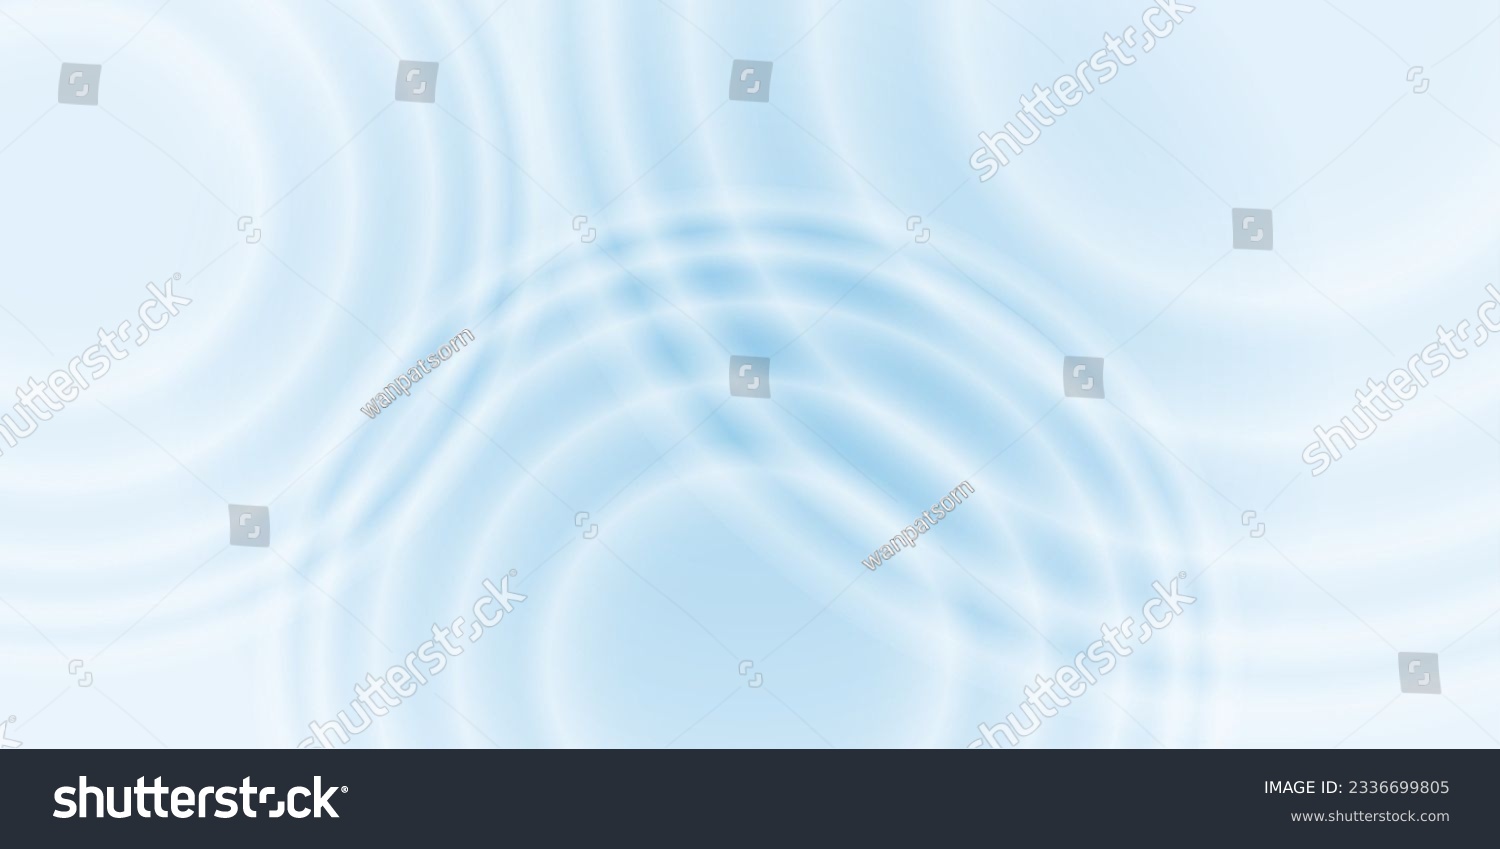 Closeup of blue transparent clear calm water surface texture with splashes and bubbles for cosmetic moisturizer background. vector design. #2336699805